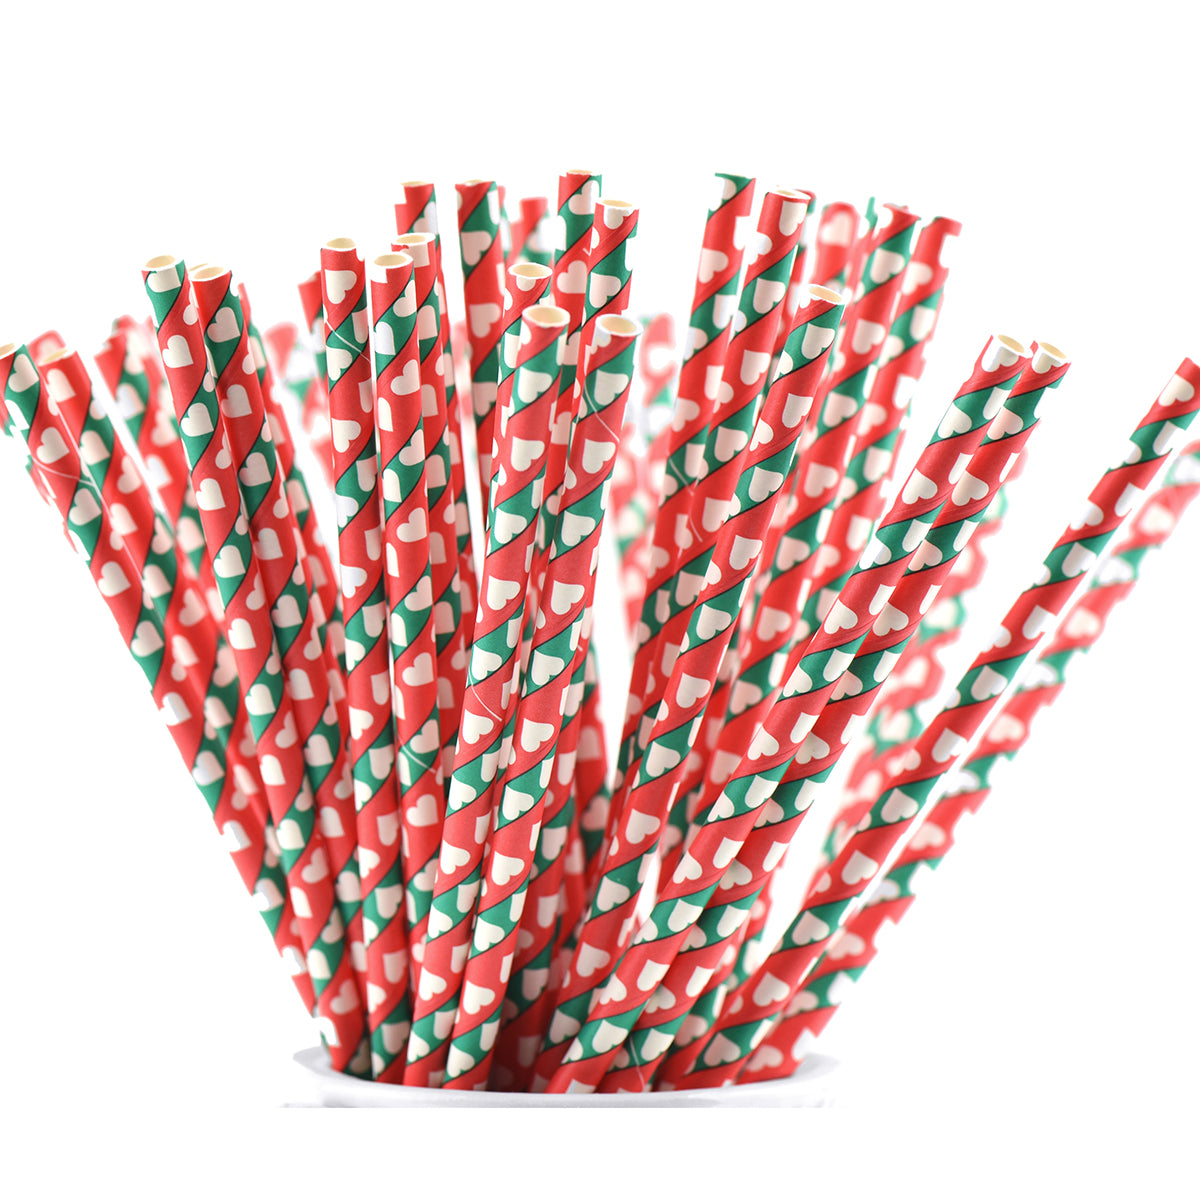 Red and Green Christmas Tree Paper Straws: Christmas Tree Straws, Holiday  Party, Christmas Party, Christmas Tree Paper Straws 